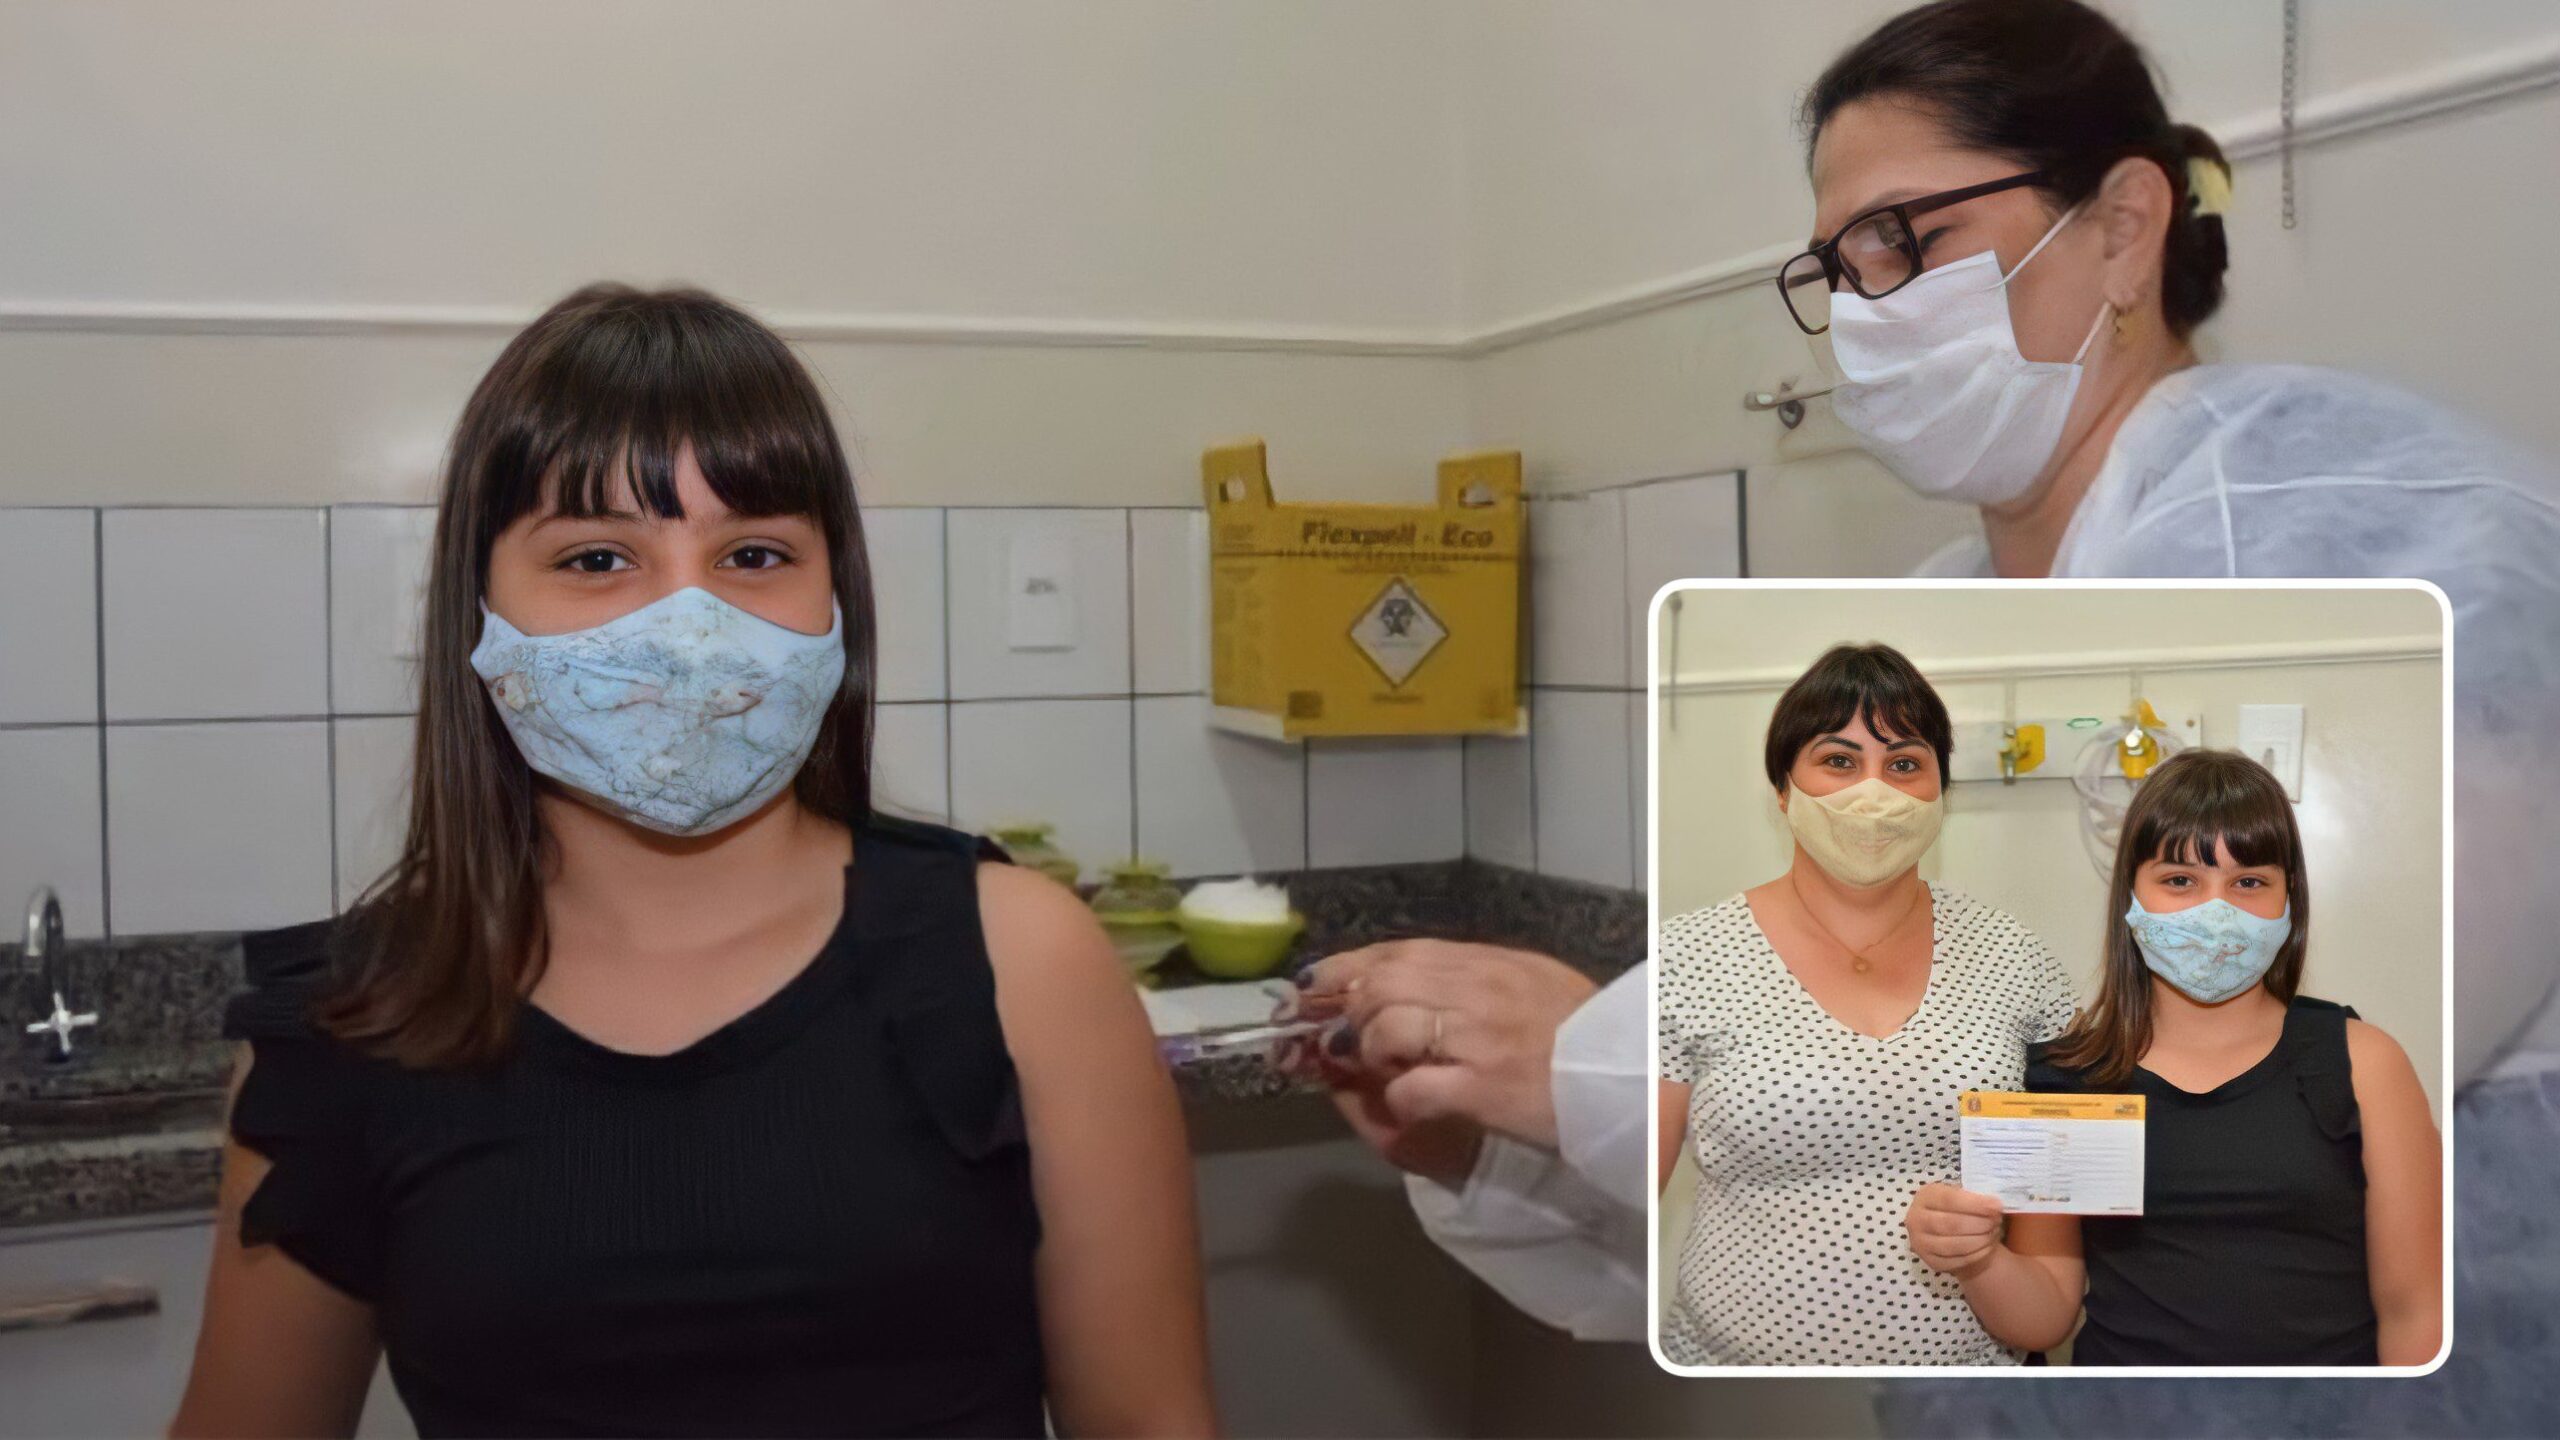 Brazil: Child Vaccination Suspended After 10-Year-Old Girl Suffers Cardiac Arrest Hours After Receiving Pfizer Vaccine